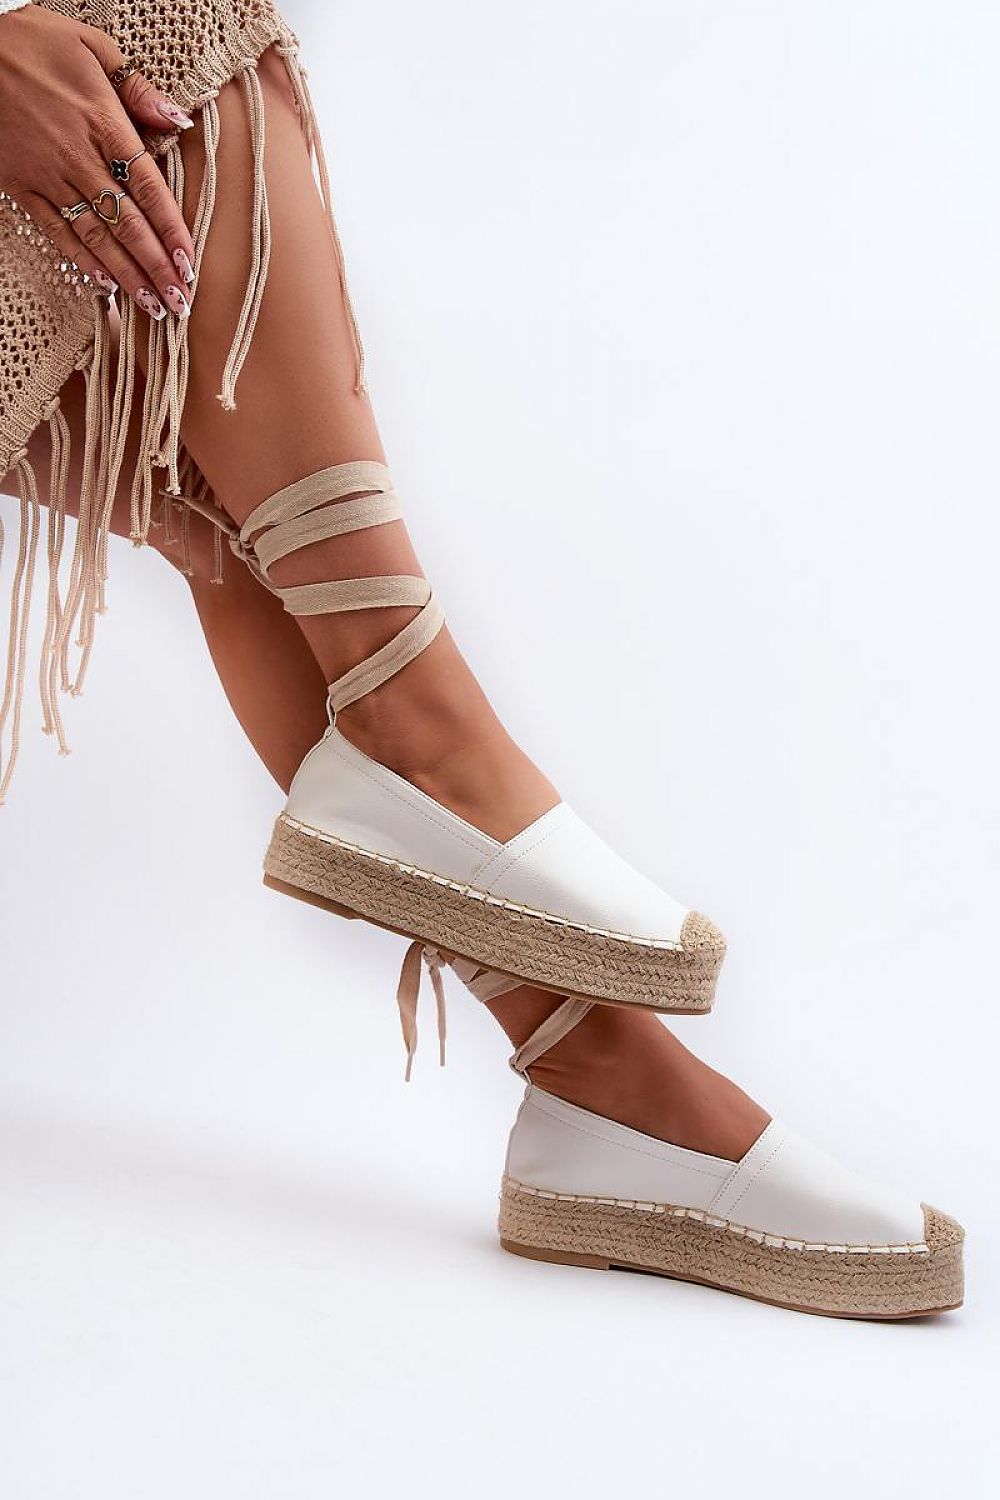 Women's Step in Style White Espadrille Platform Sandals with Lace-up Design